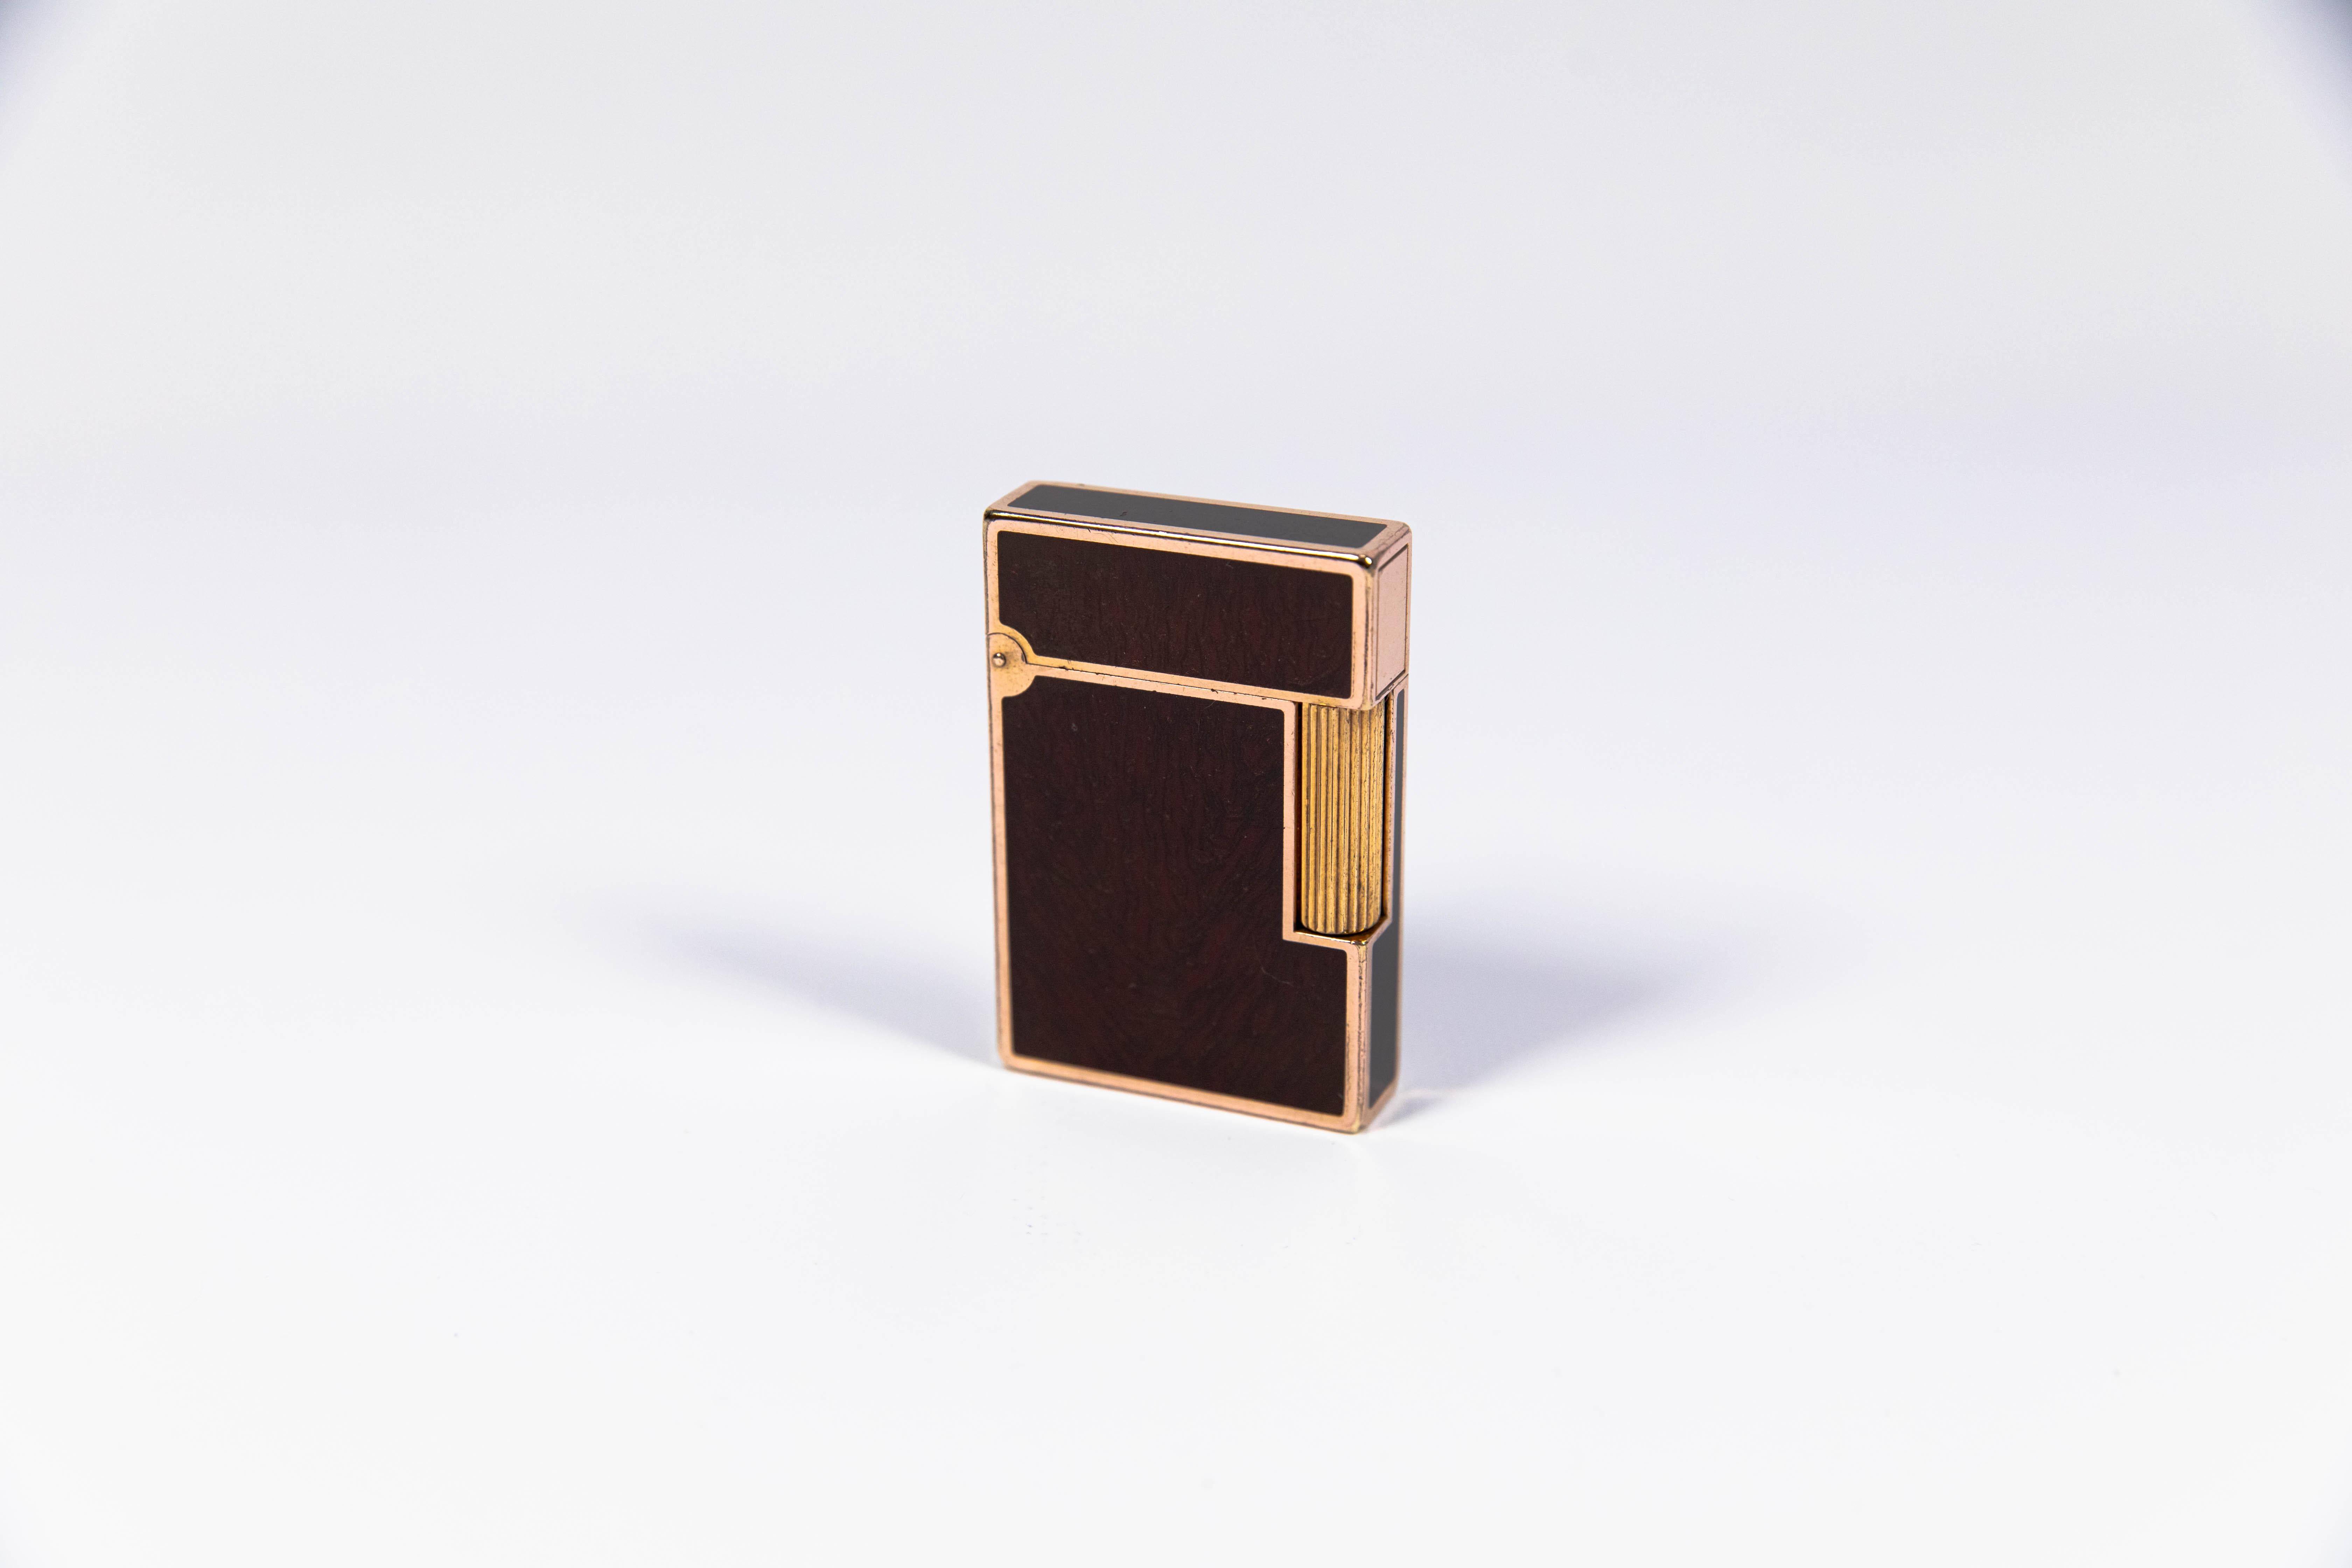 Vintage Rose Gold Linge 2 ST Dupont Lighter in Woodgrain Lacquer 1990s

The iconic S.T. Dupont name is known for quality, well-made cigarette lighters and other luxury implements. The company’s origin can be traced to Simon Tissot-Dupont opening his